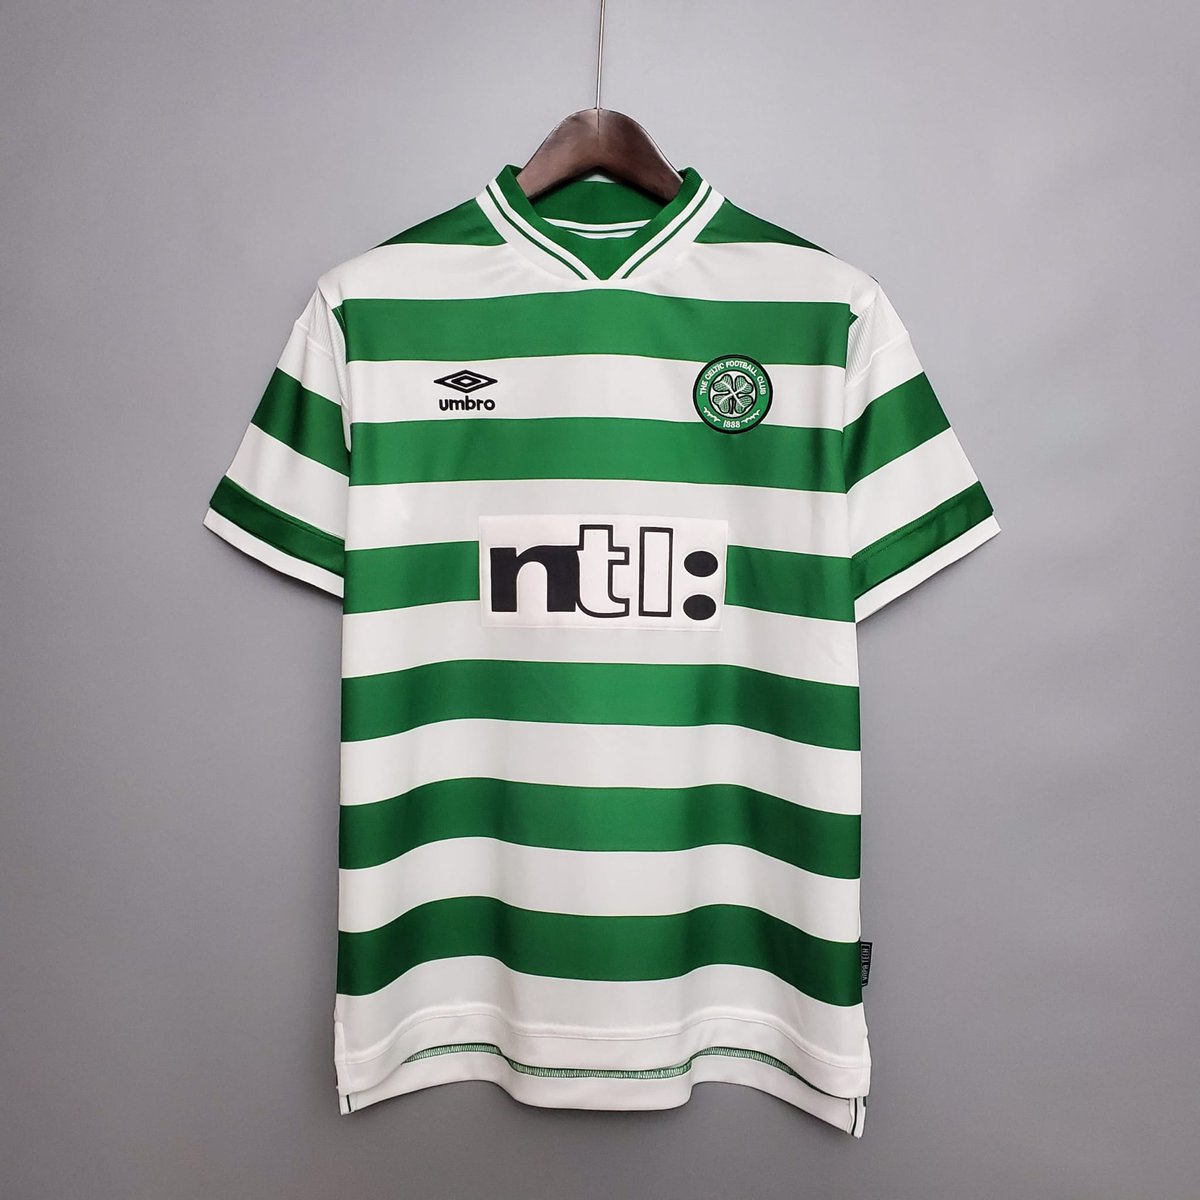 What's the chances anyone on here is selling this absolute beauty in size M in excellent condition?🤔